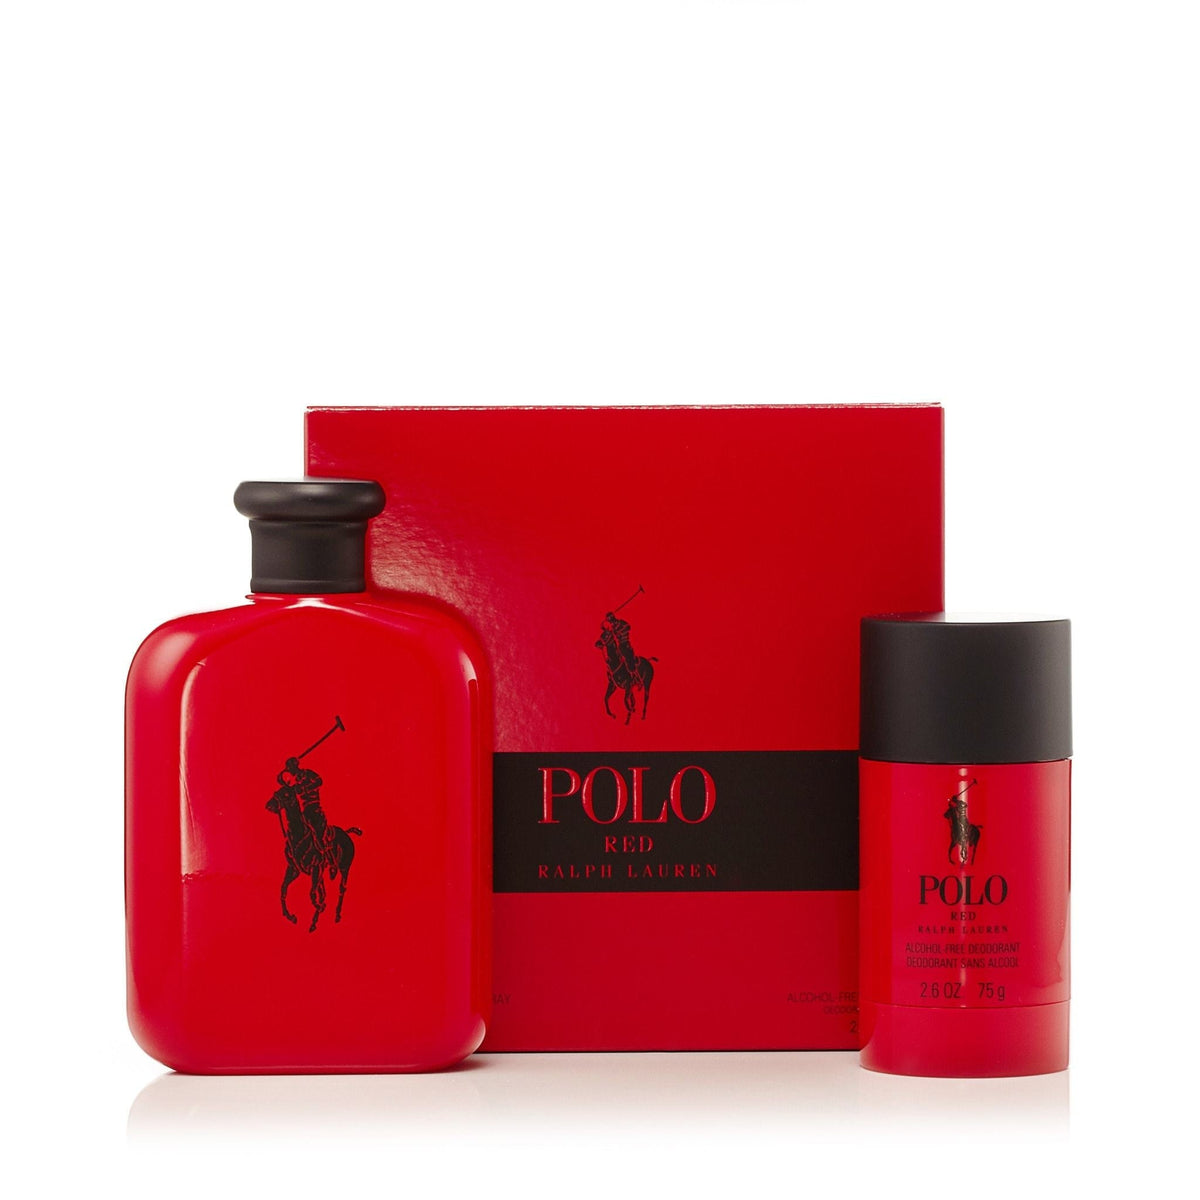 Polo Red Gift Set for Men by Ralph Lauren 4.2 oz.